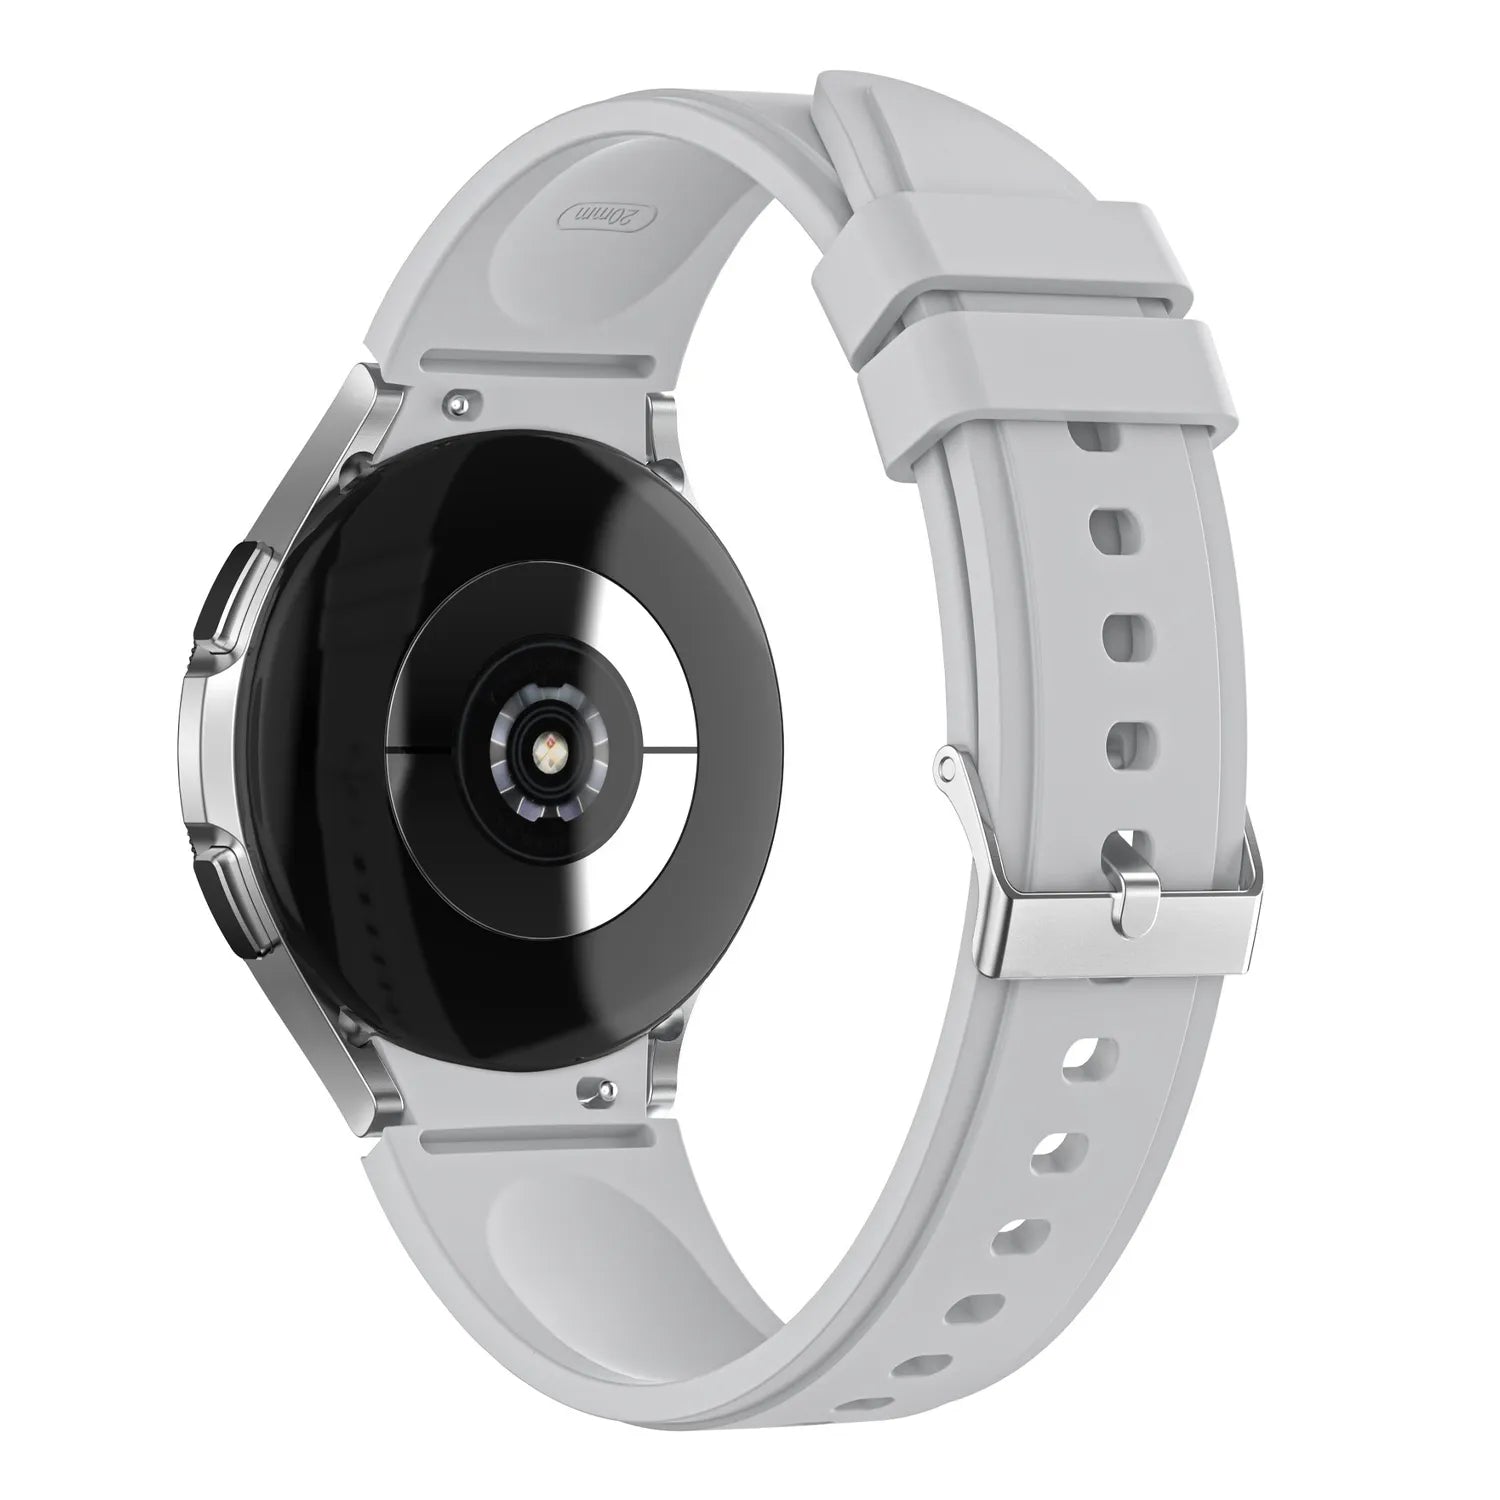 Galaxy Watch silicone band#color_light gray